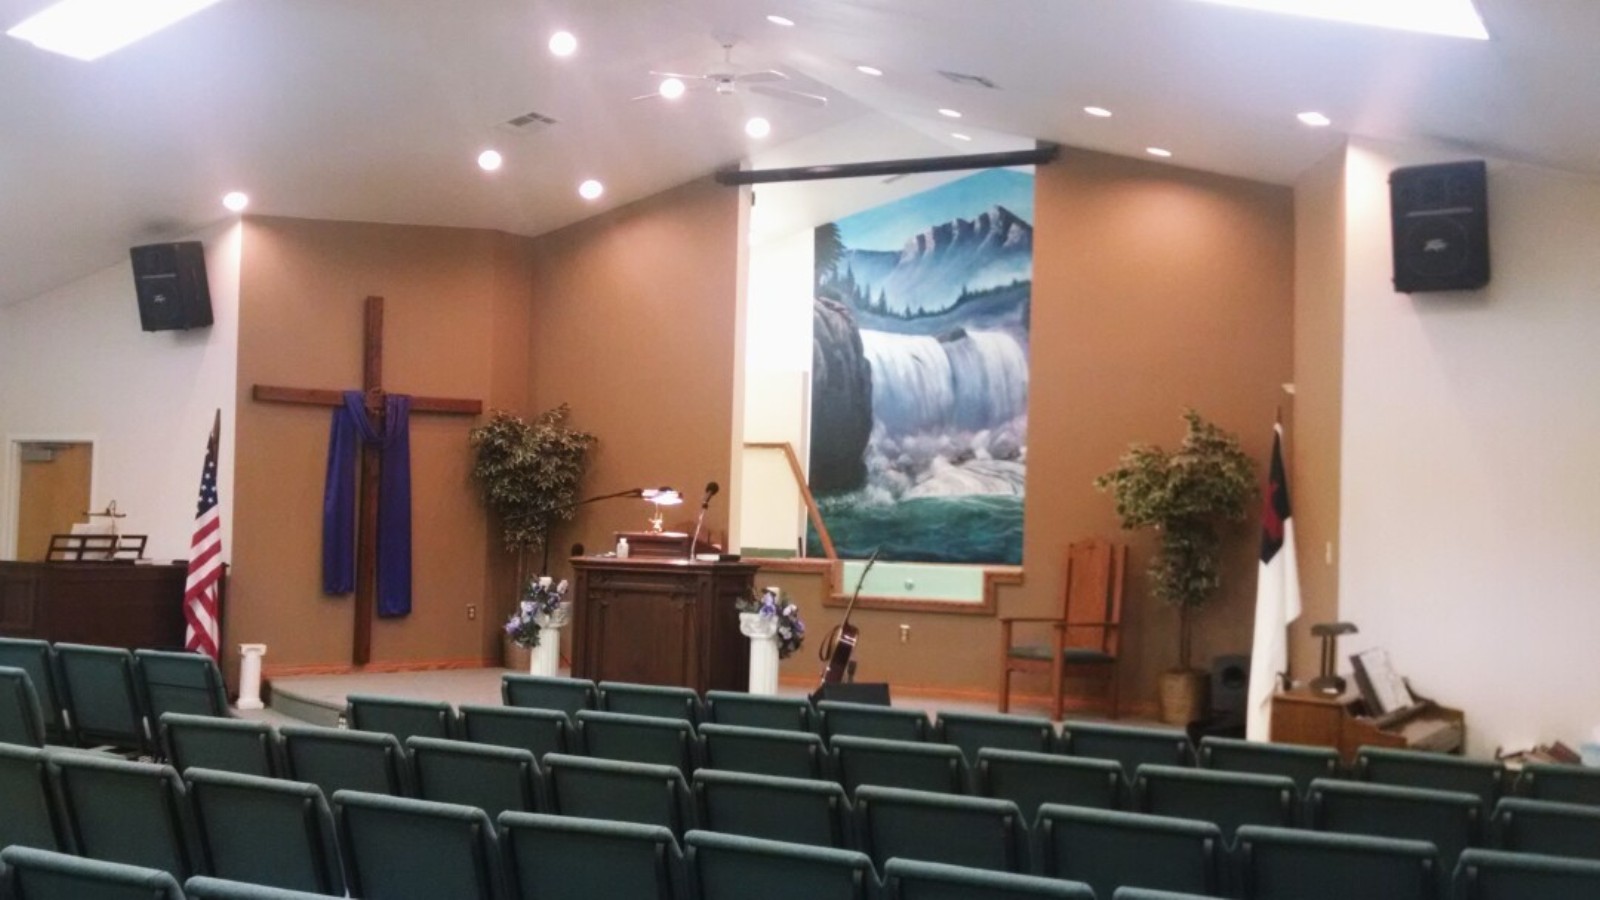 Church Sanctuary used as Background Image